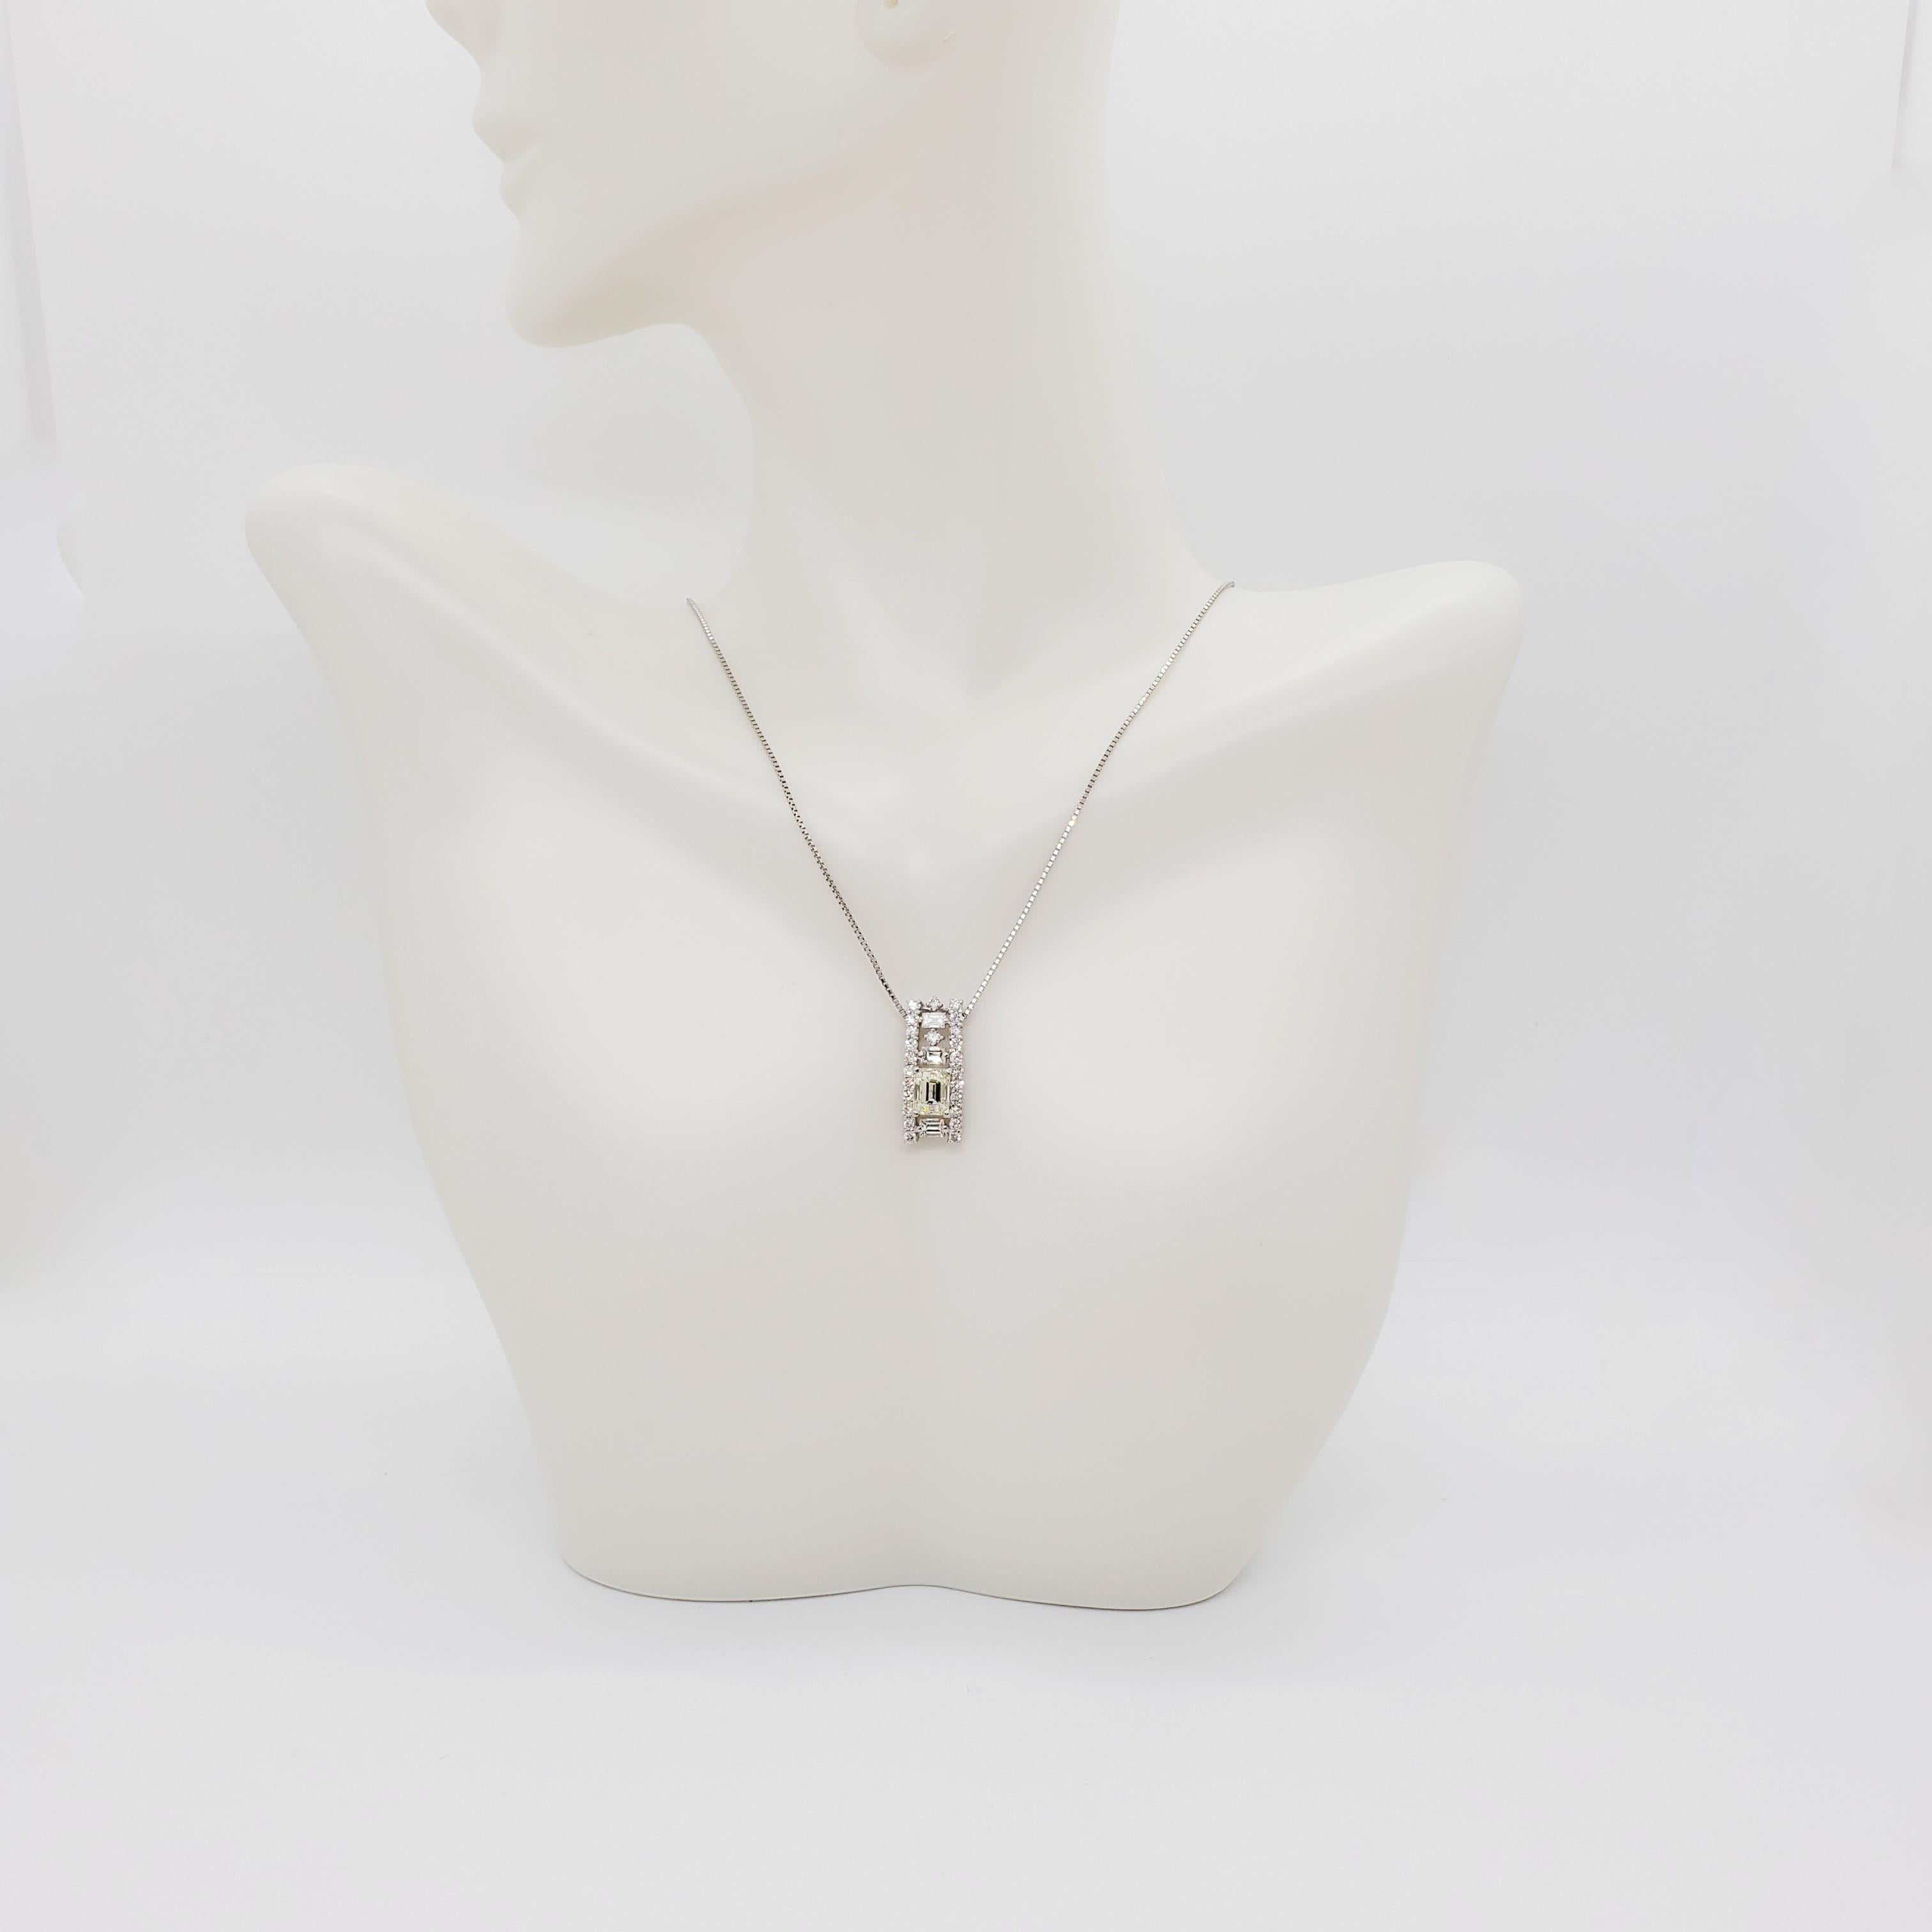  Diamond Pendant Necklace in Platinum In Excellent Condition For Sale In Los Angeles, CA